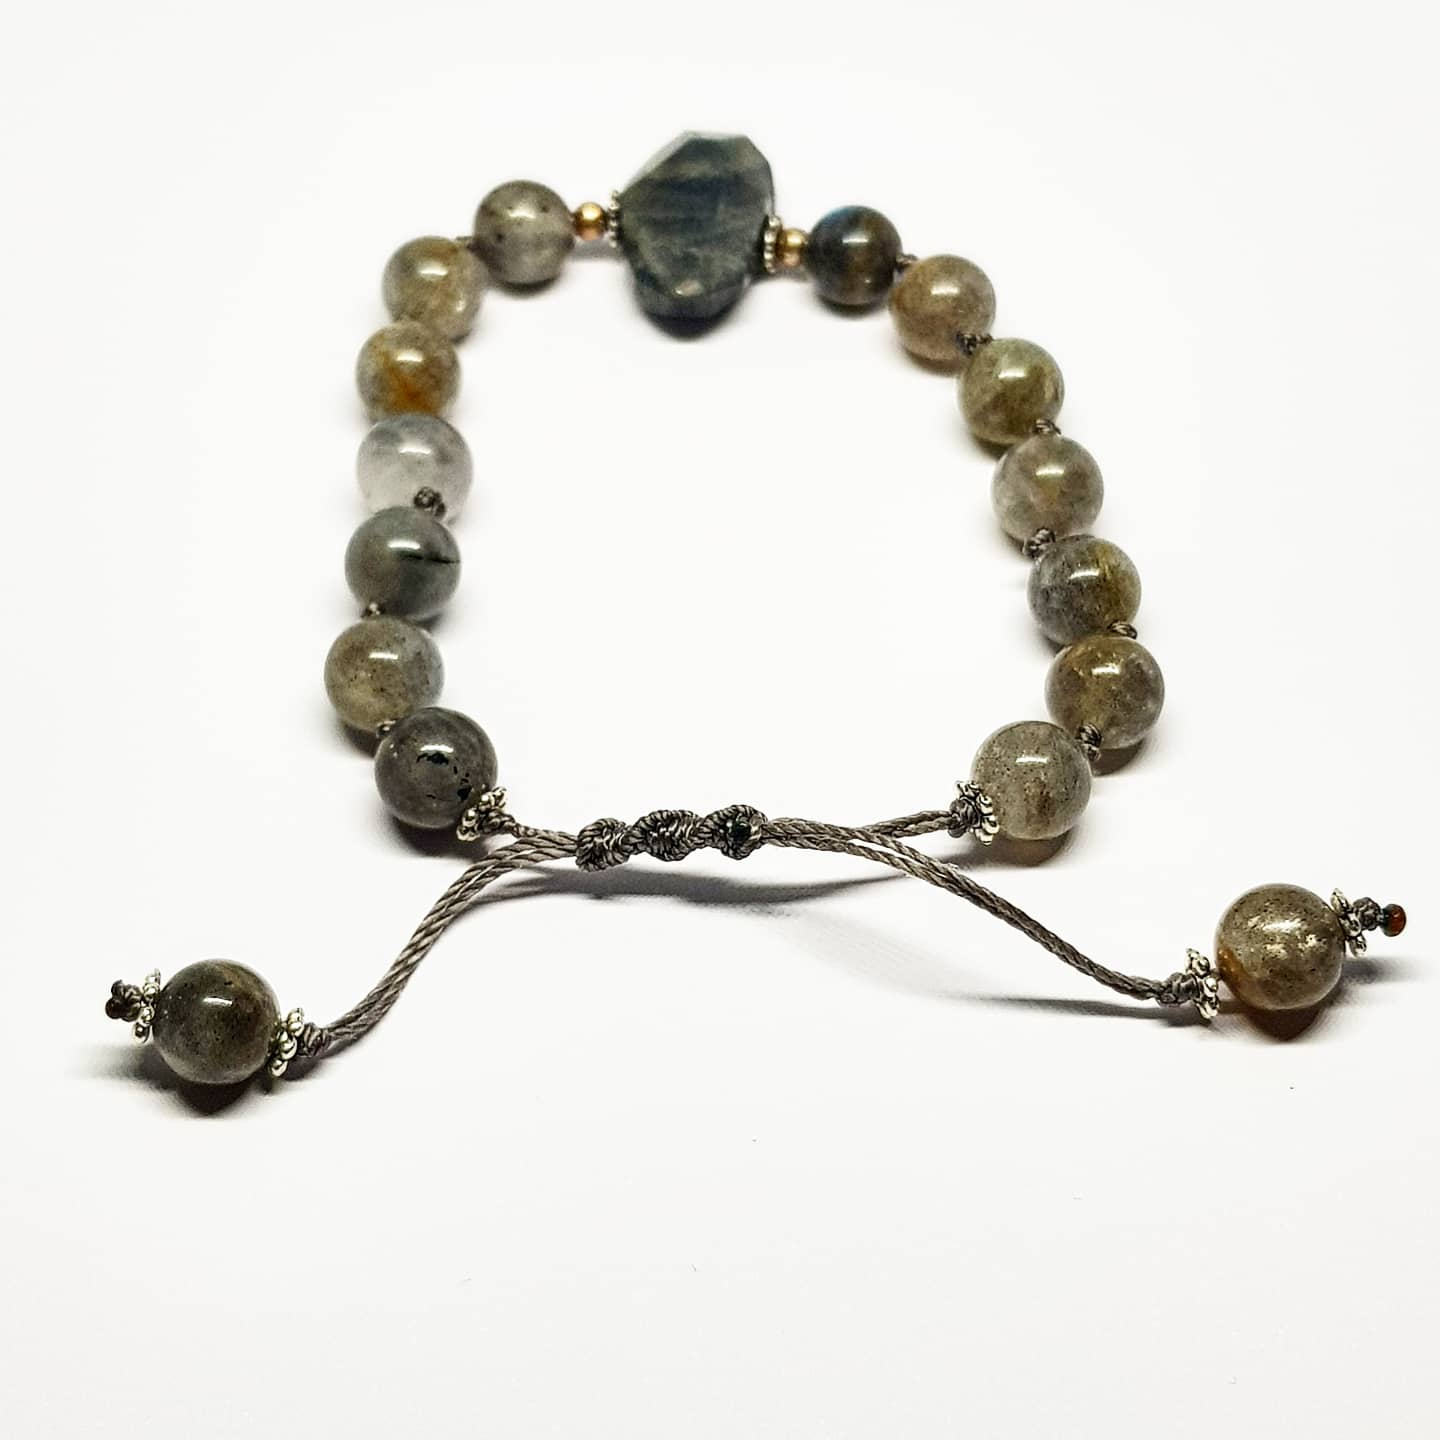 Labradorite with Sterling Silver Spacer Beads